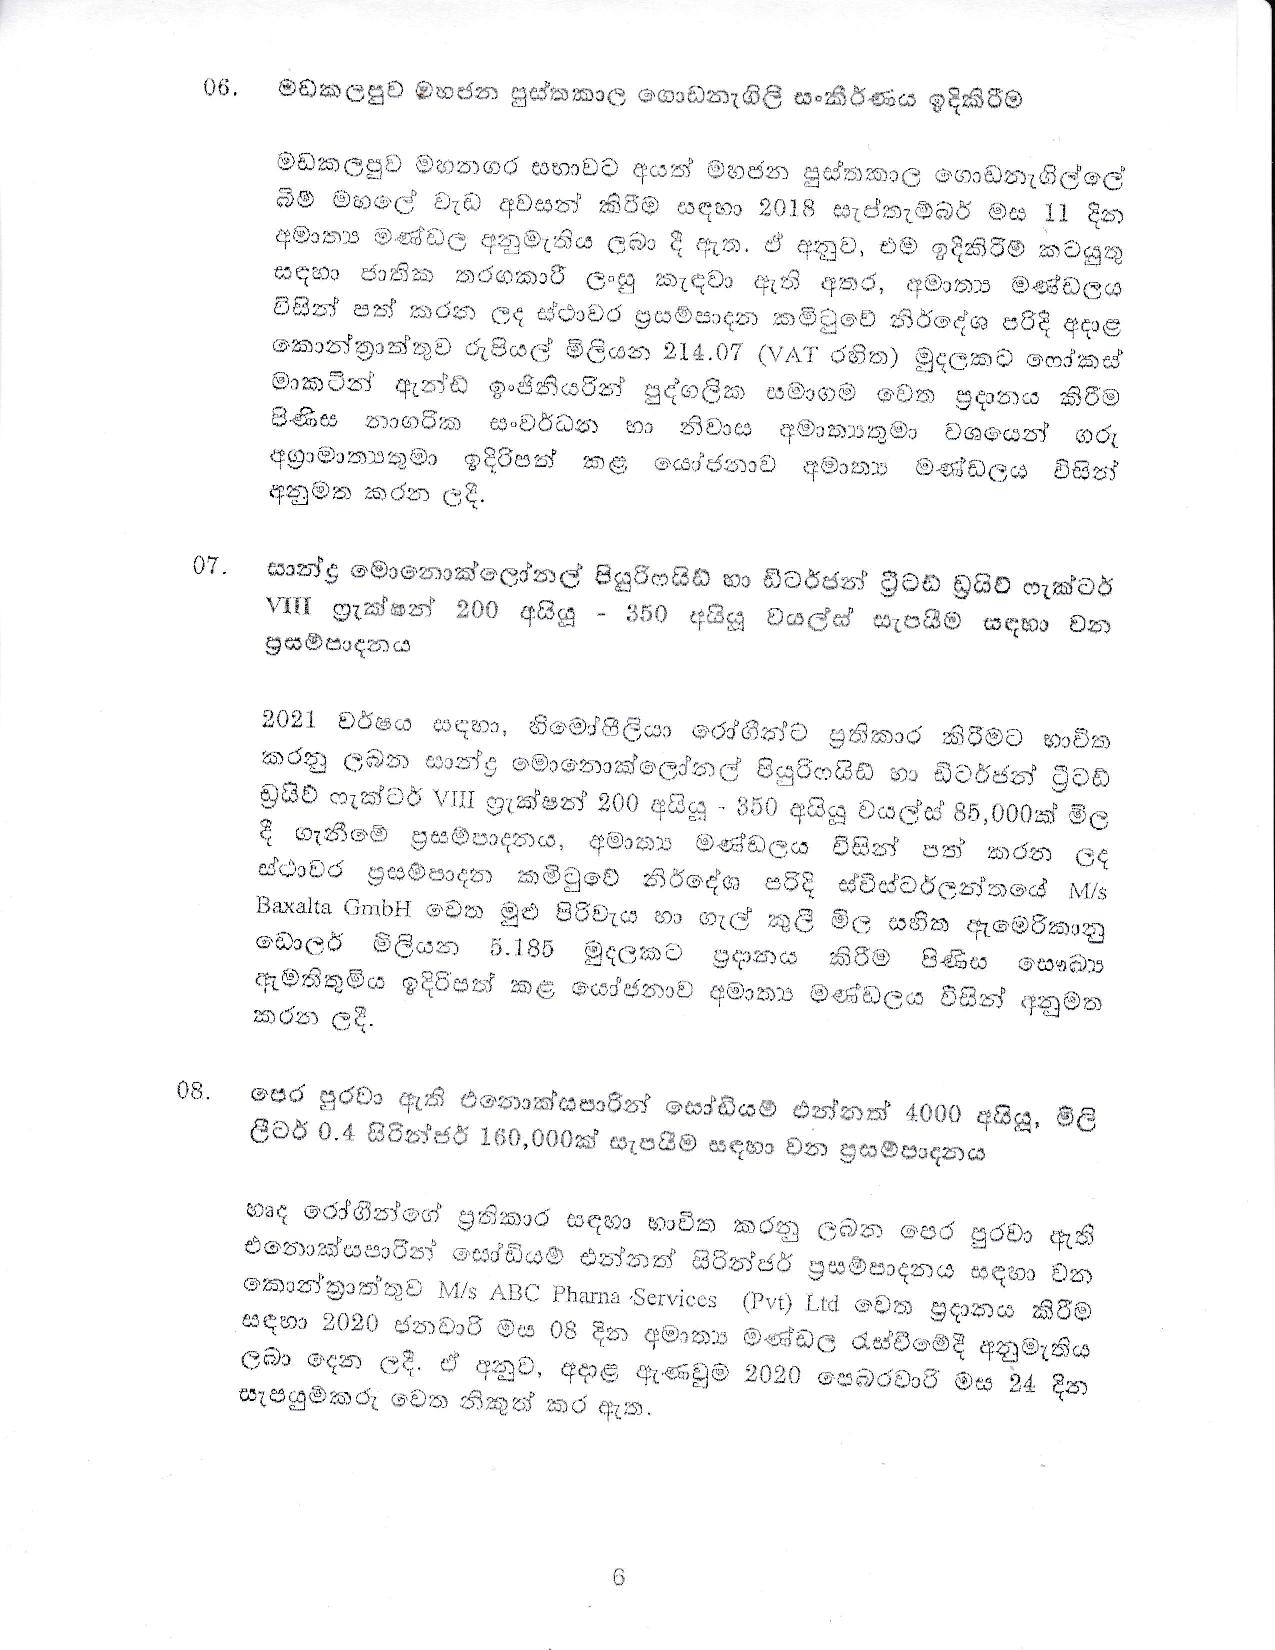 Cabinet Decision on 05.10.2020 page 006